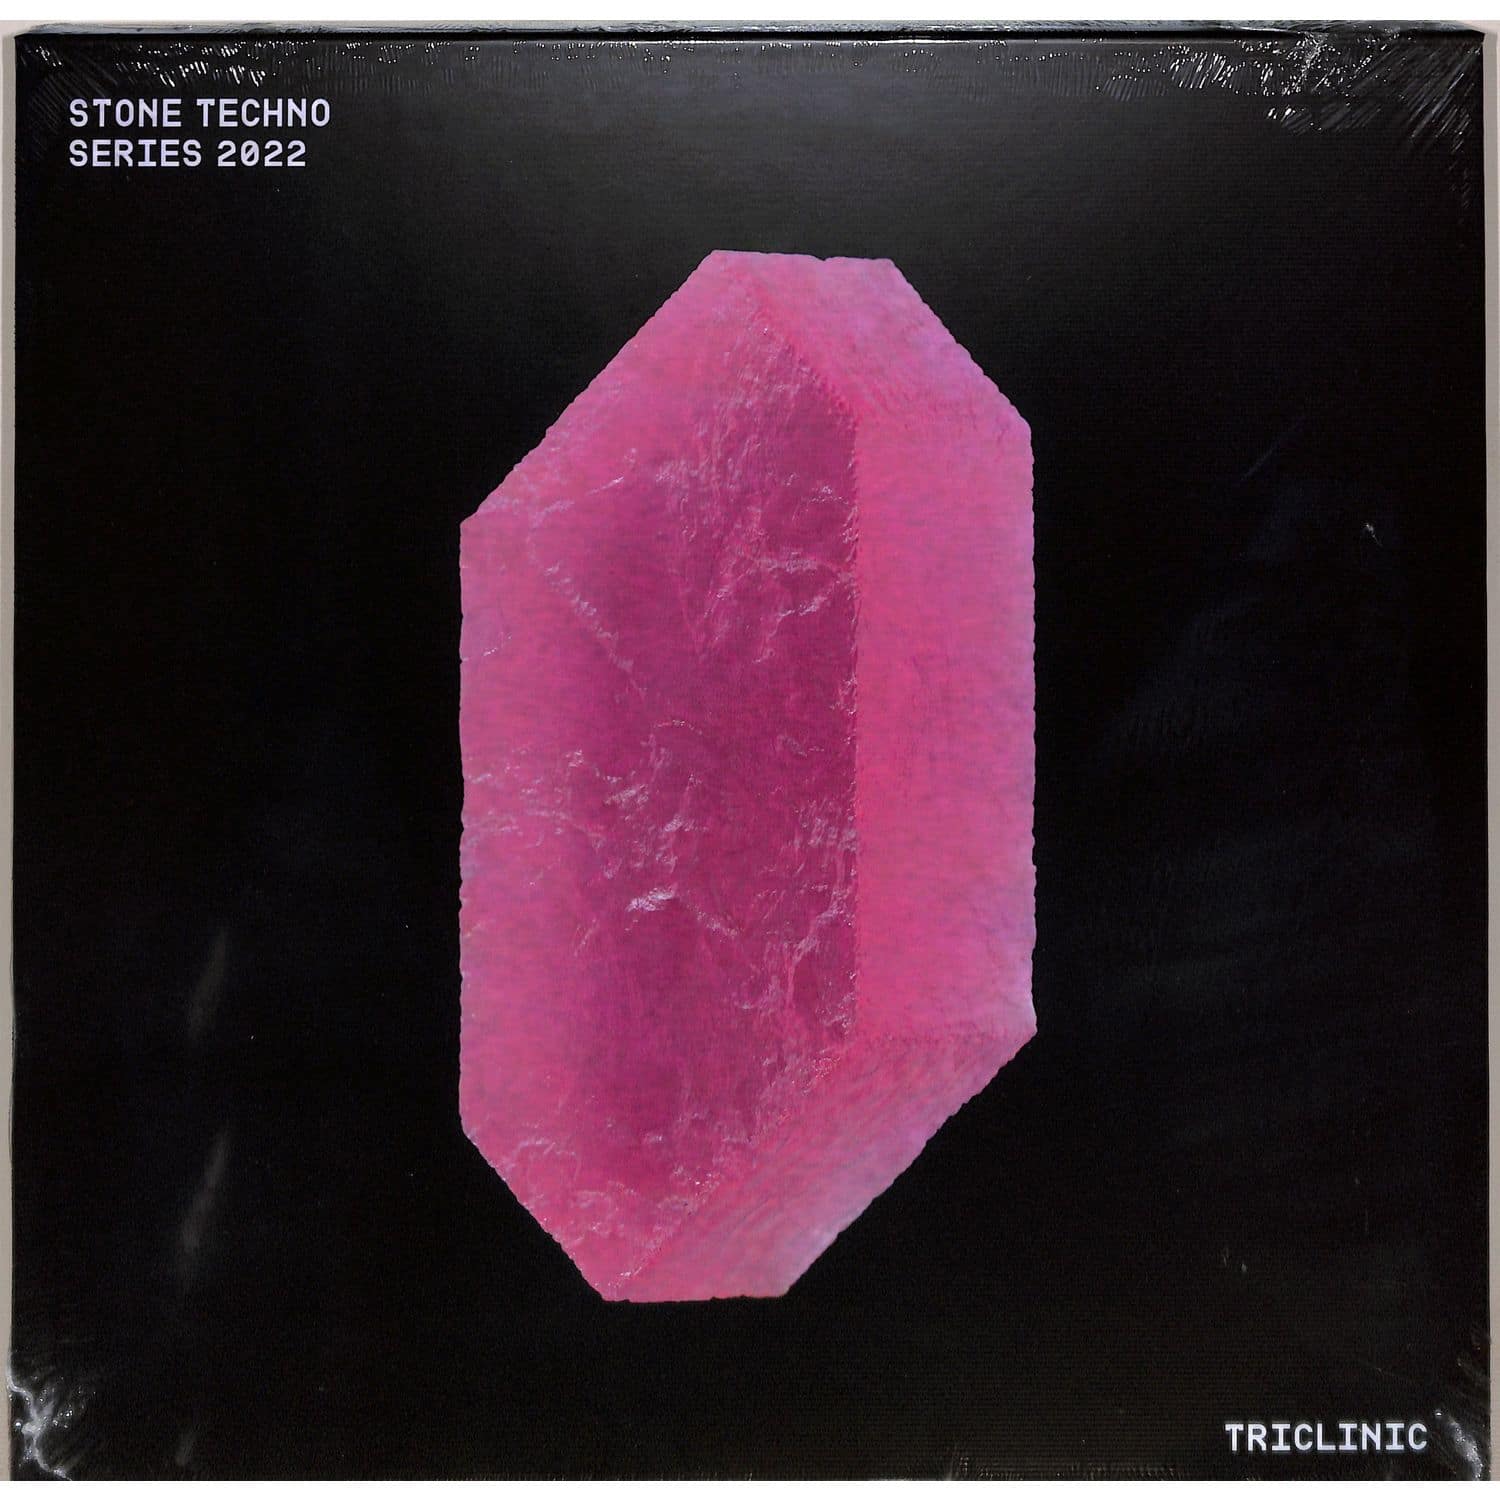 Various Artists - STONE TECHNO SERIES 2022 - TRICLINIC 